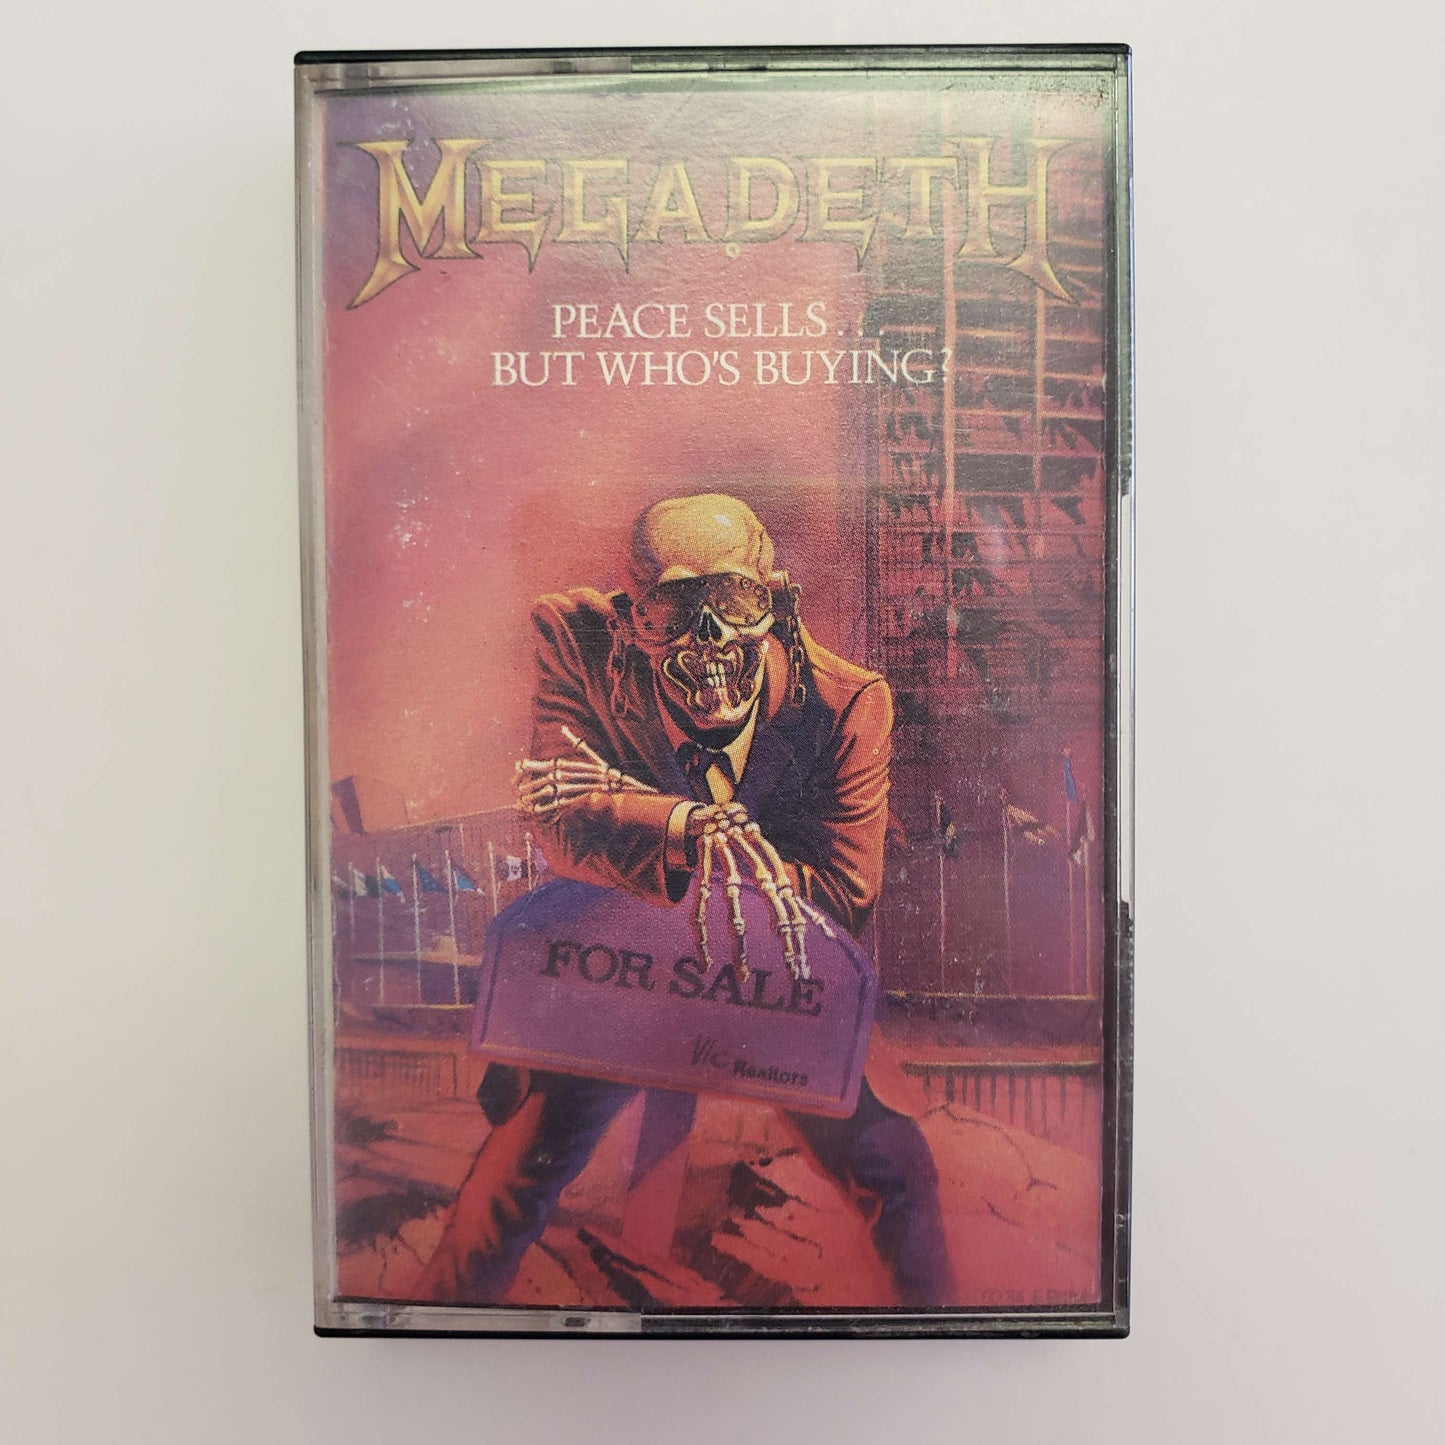 Megadeth - Peace Sells... But Who's Buying? original cassette tape